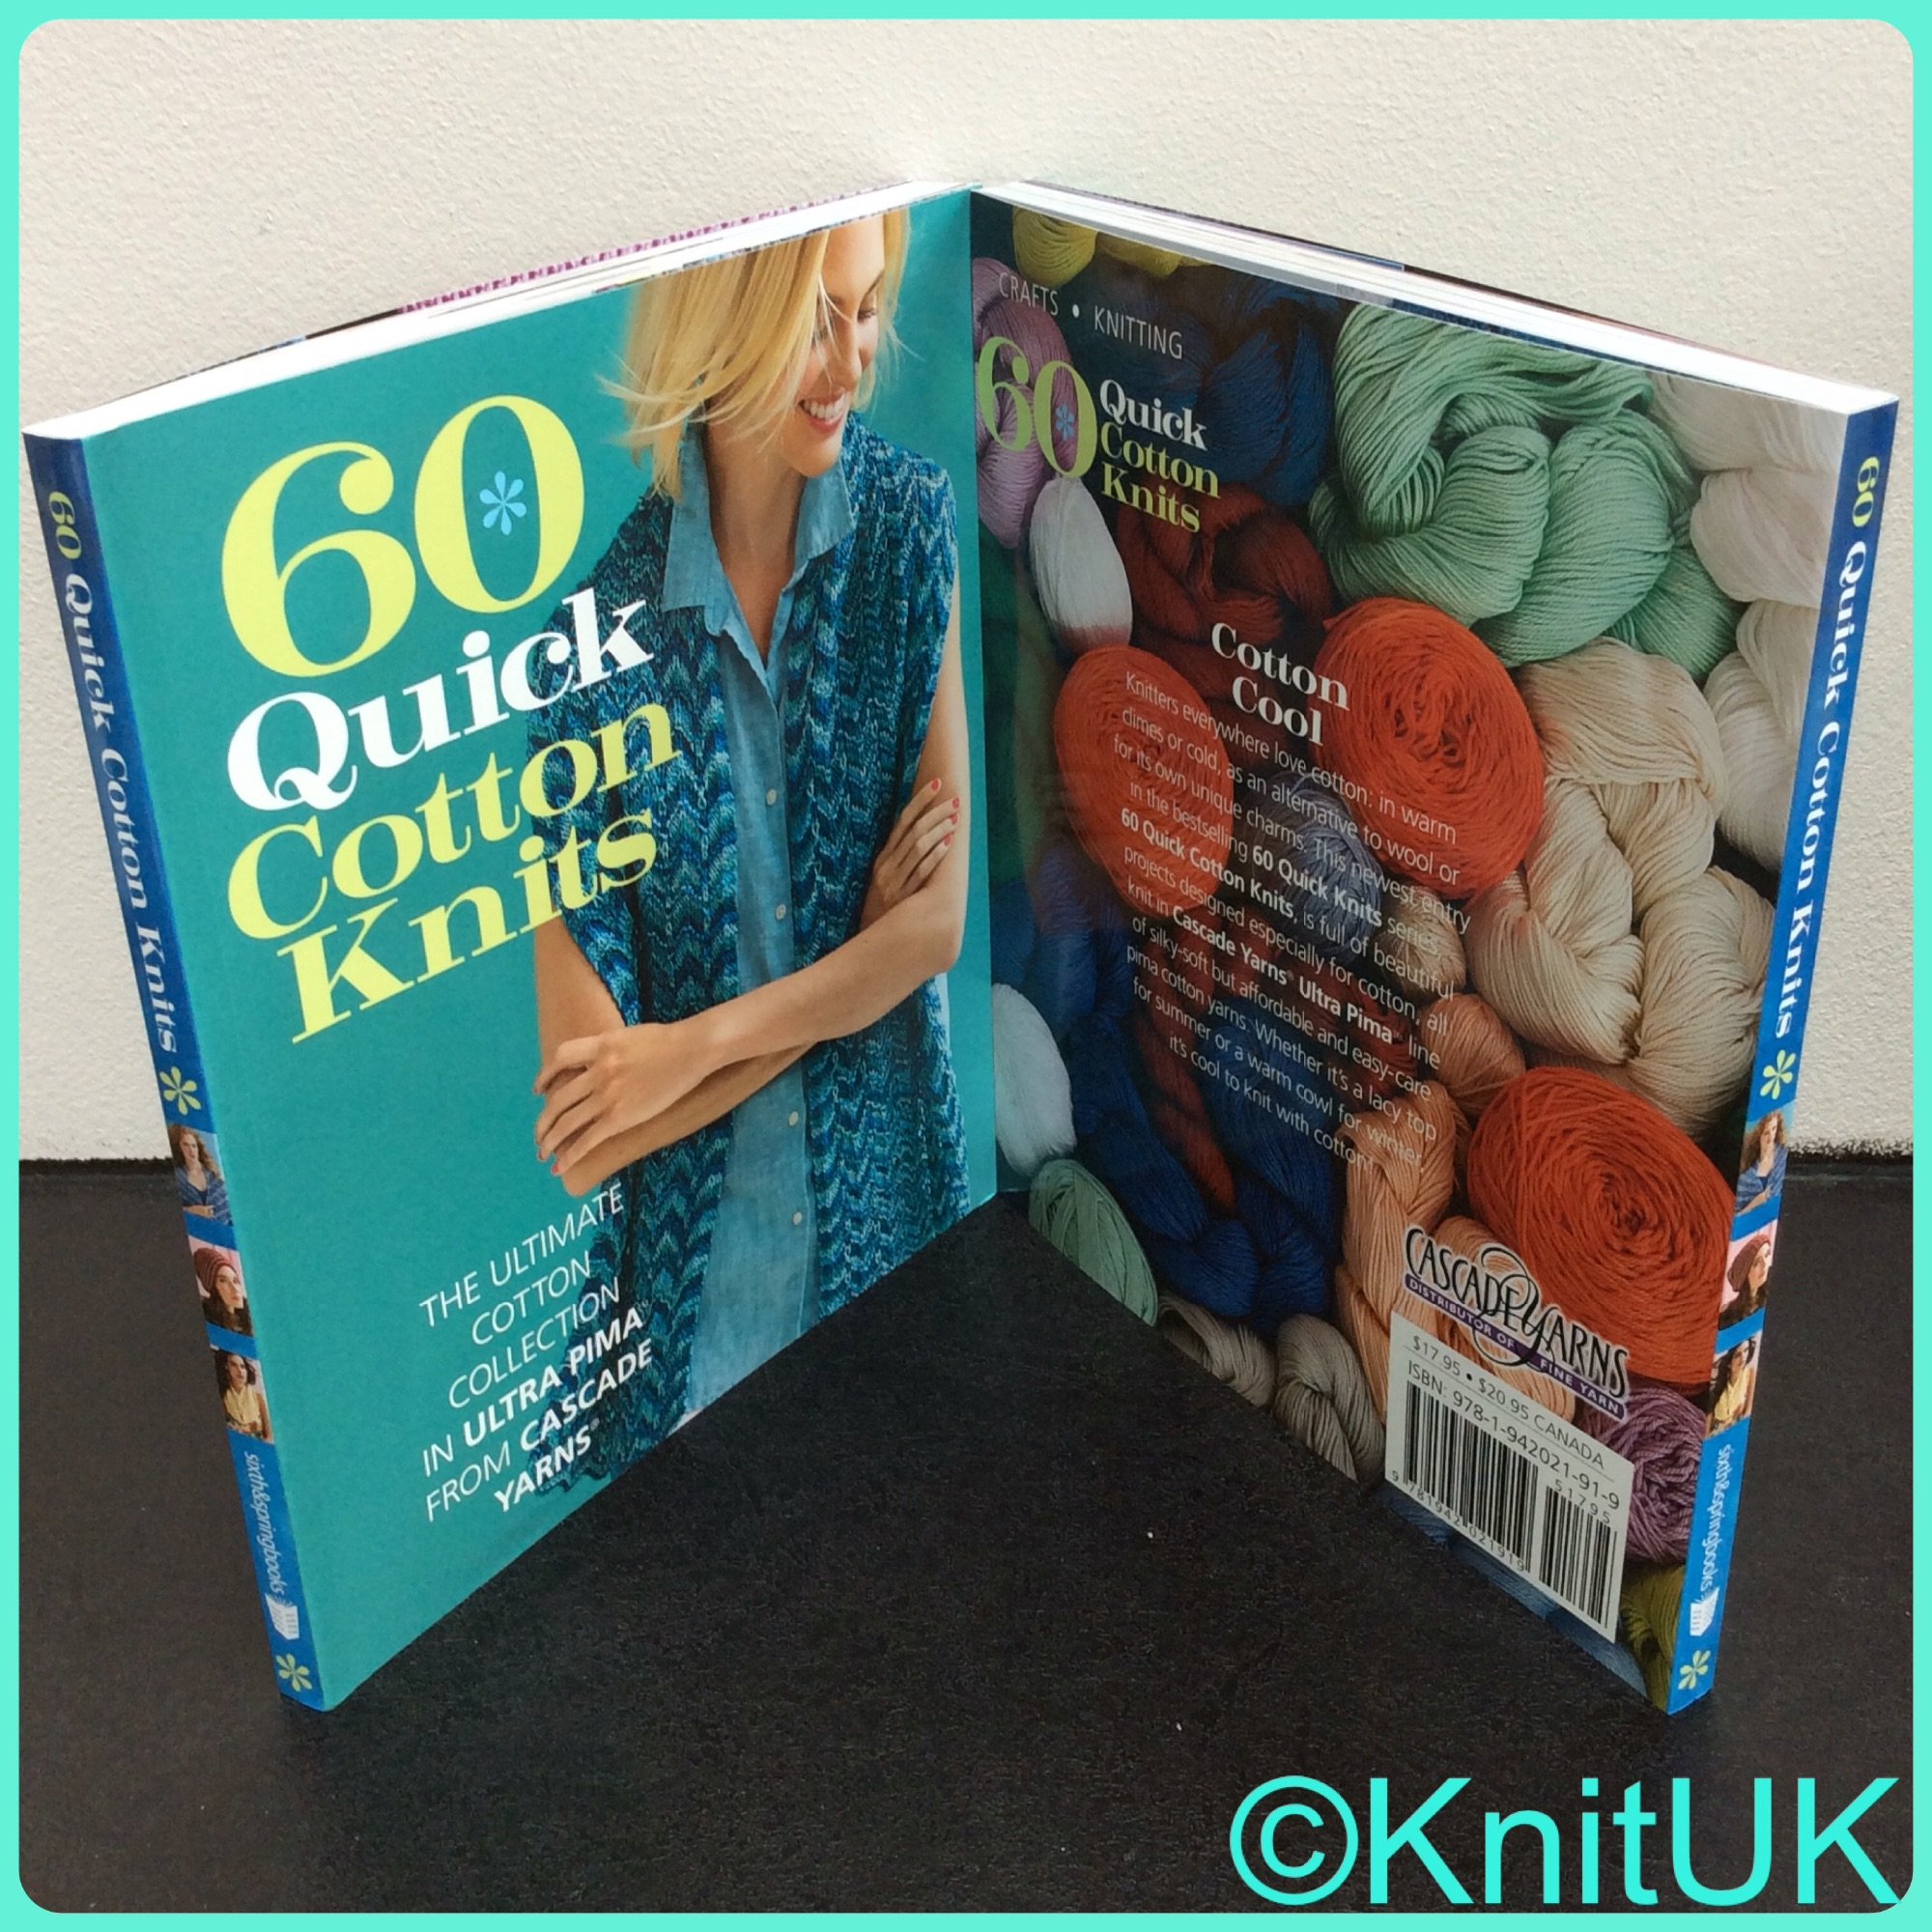 60 quick cotton knits book